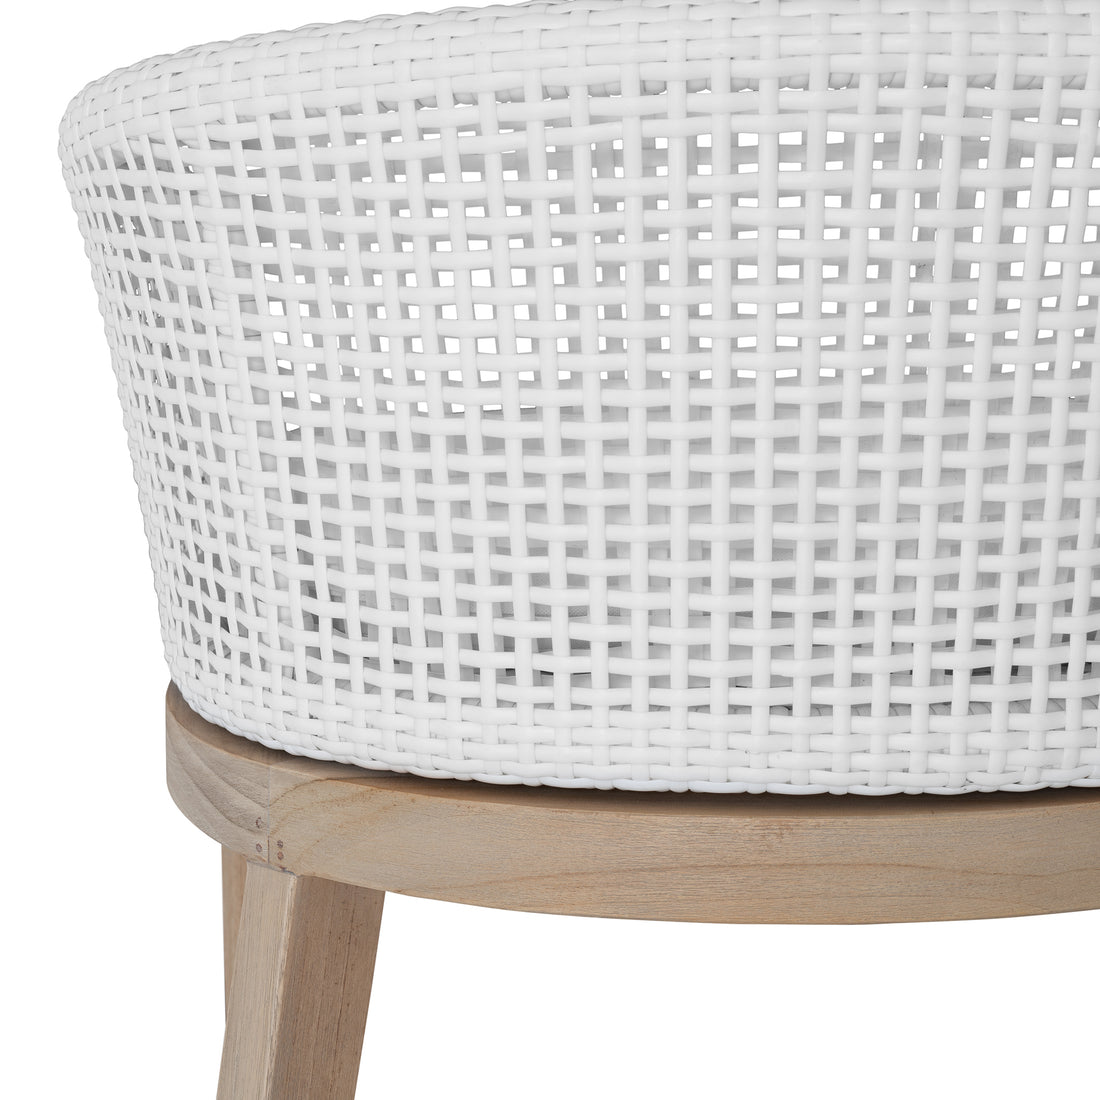 Tula Barchair | White